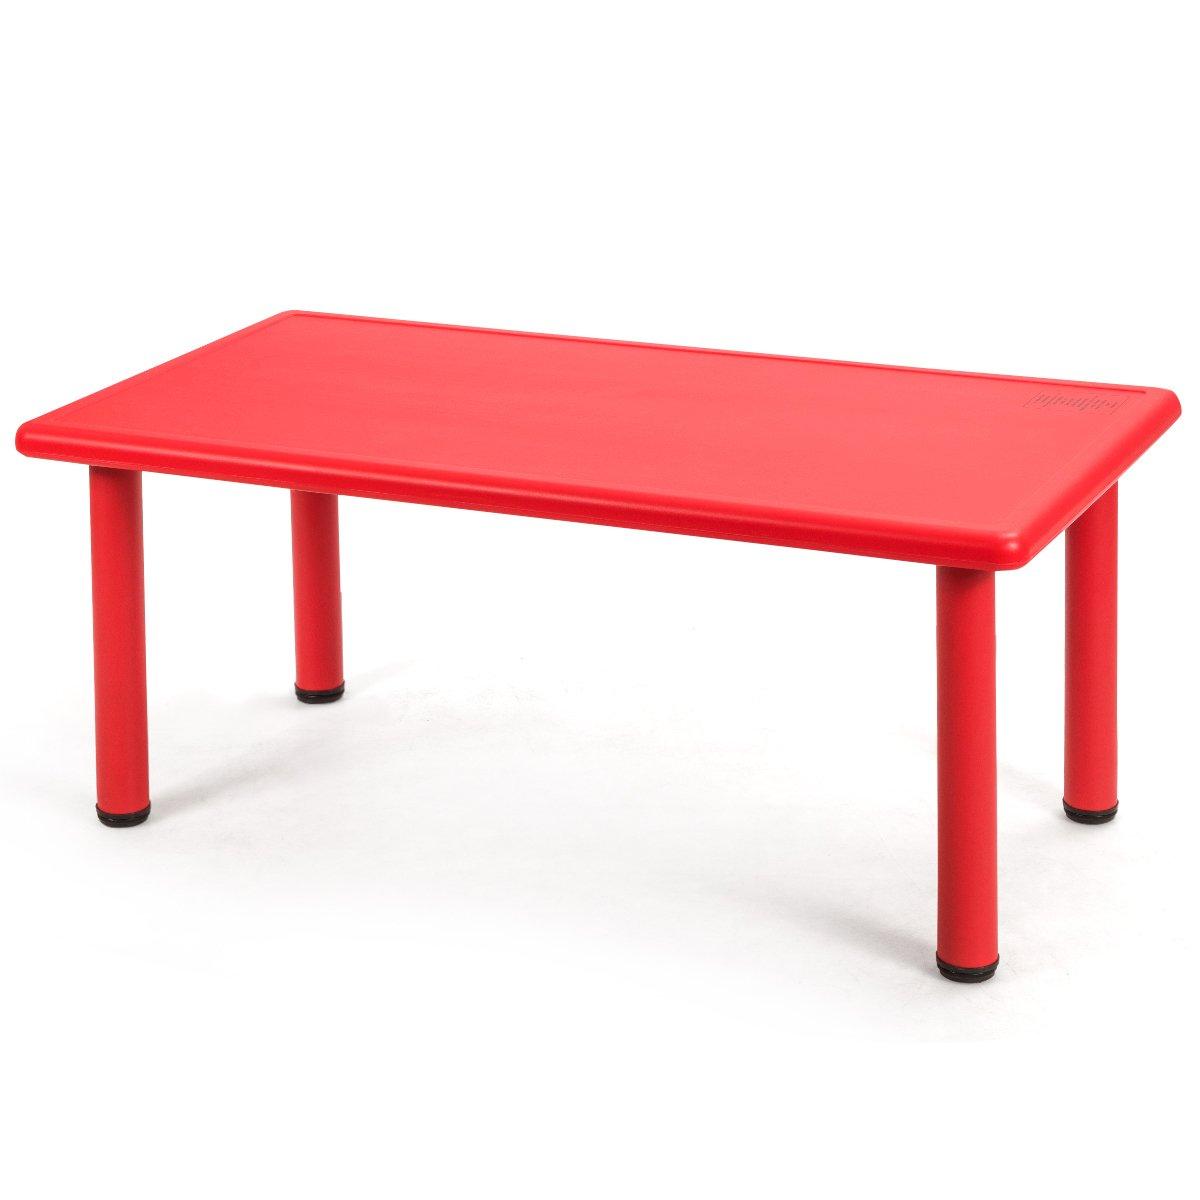 Kids Rectangular Table Dining & Play Table Indoor Outdoor Activity Table